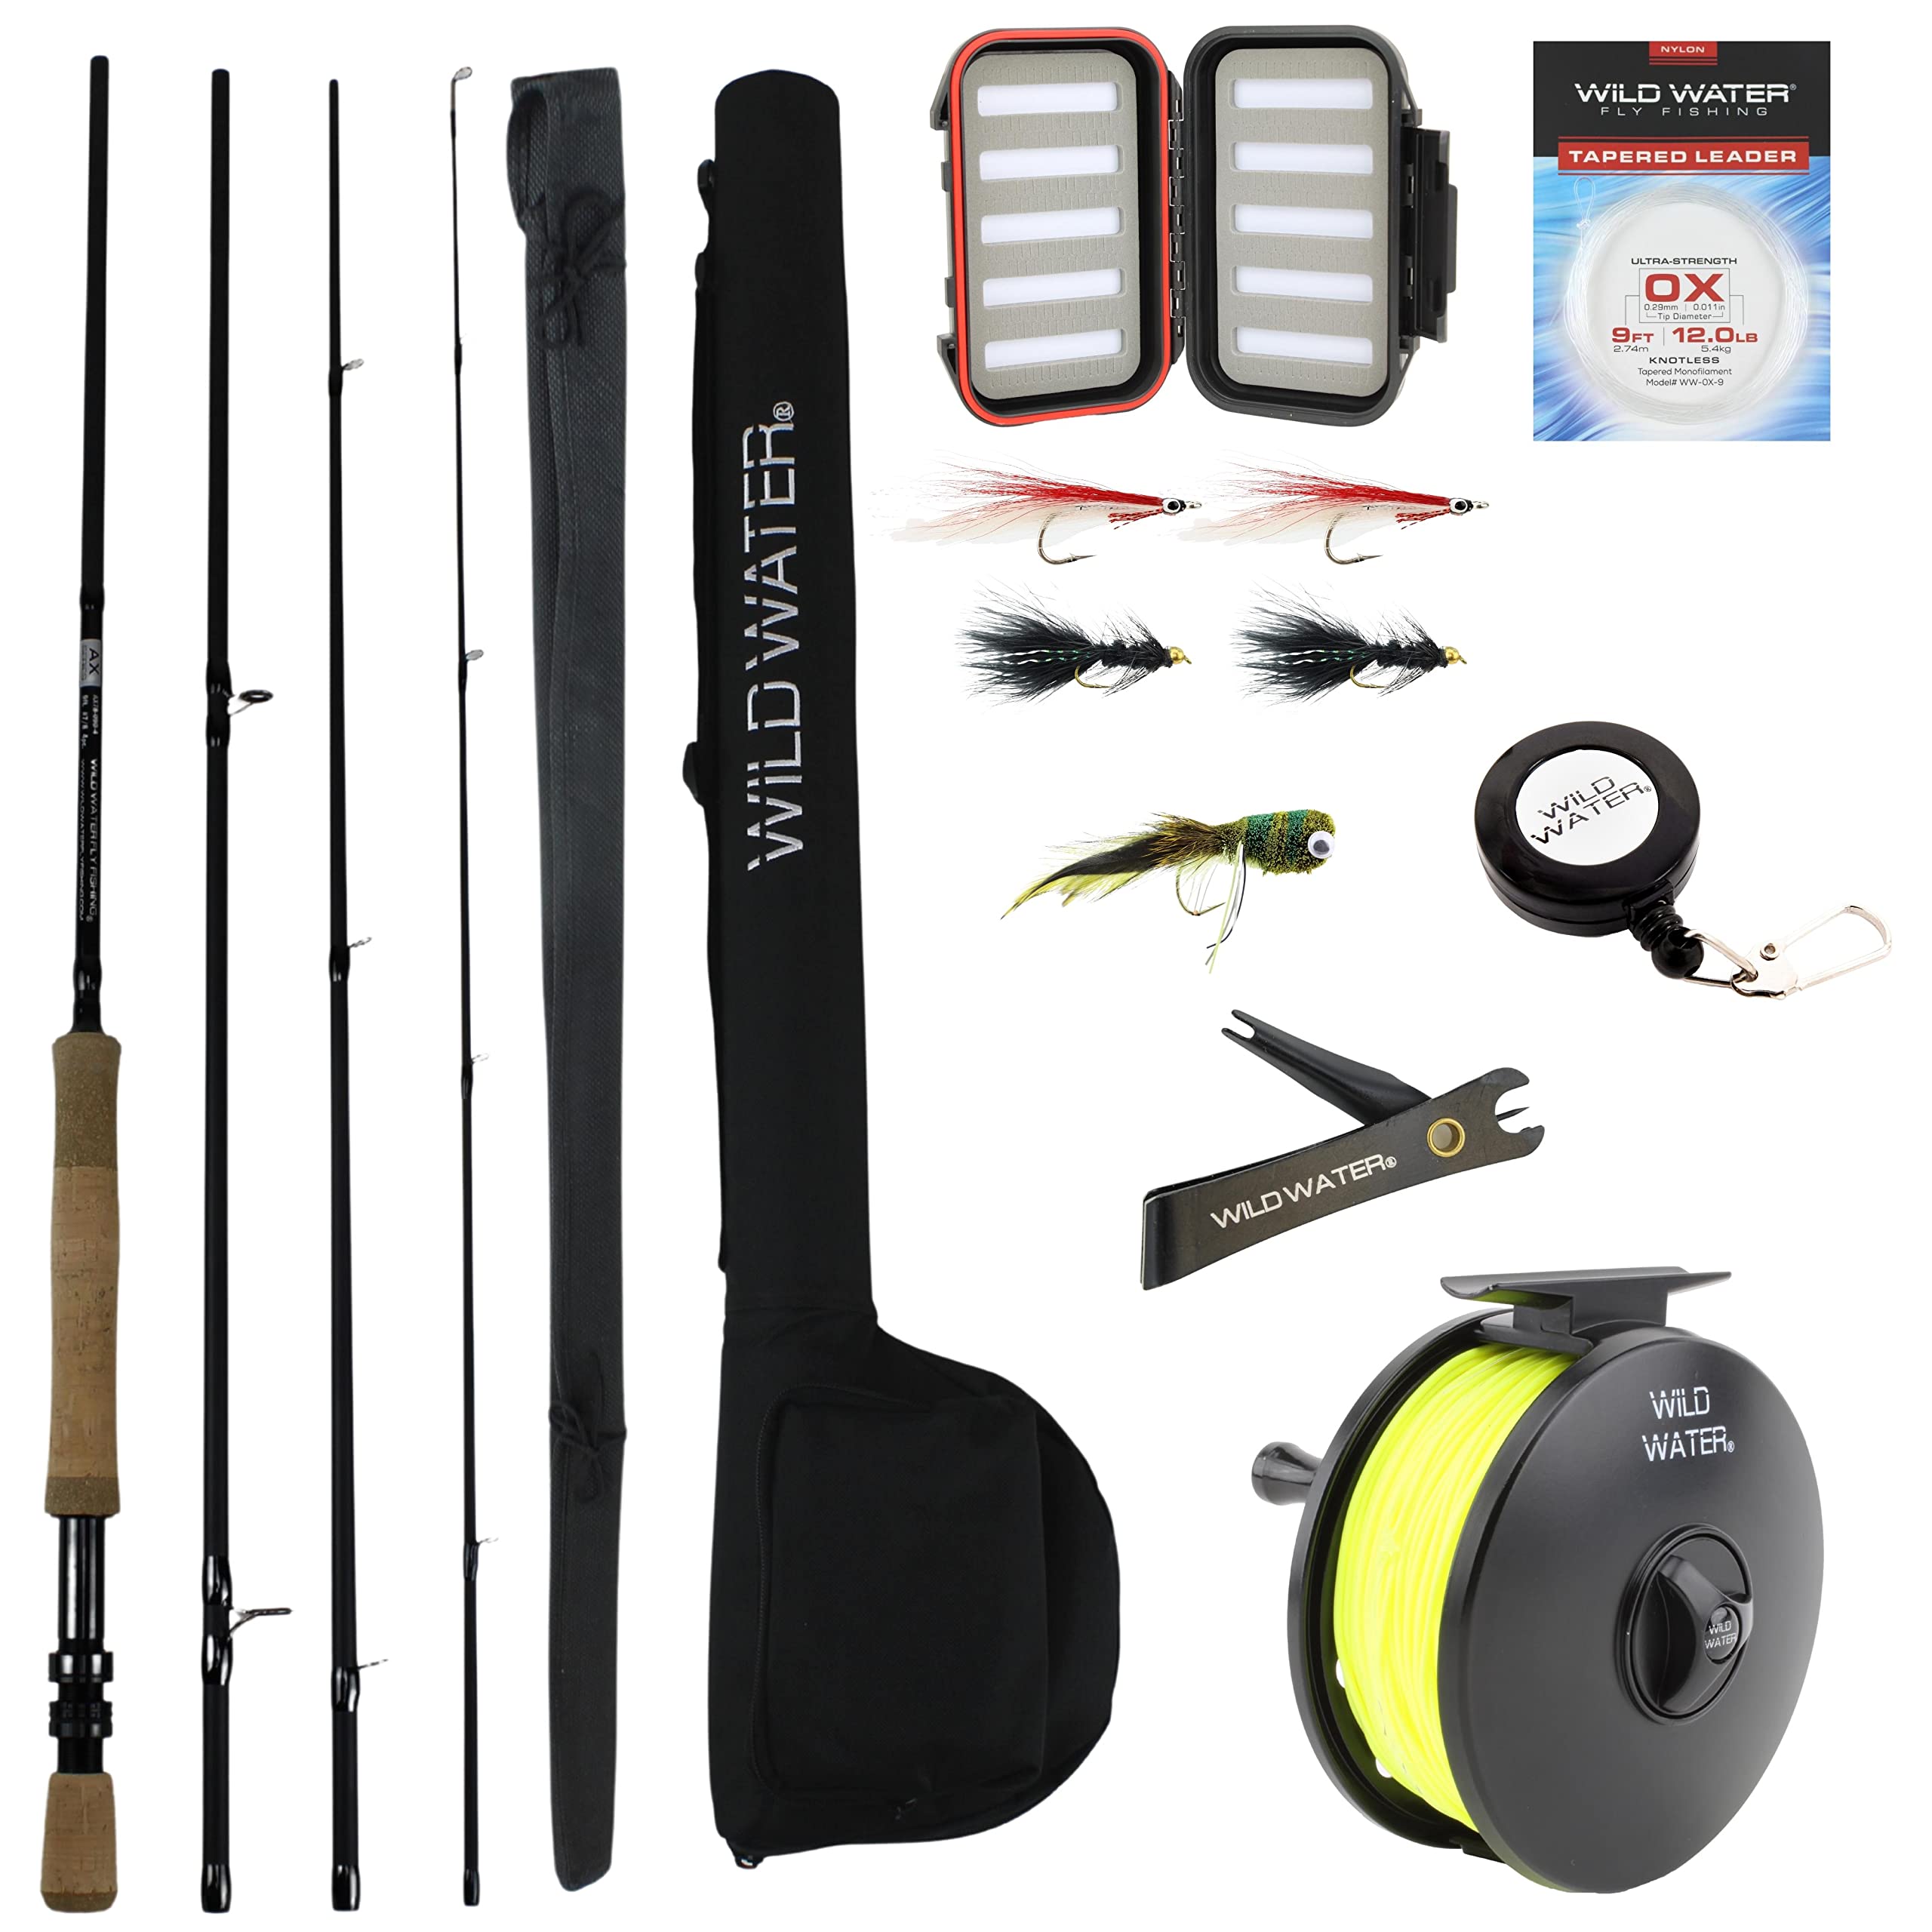  Wild Water Standard Fly Fishing Combo Starter Kit, 3 or 4  Weight 7 Foot Fly Rod, 4-Piece Graphite Rod with Cork Handle, Accessories,  Die Cast Aluminum Reel, Carrying Case, Fly Box